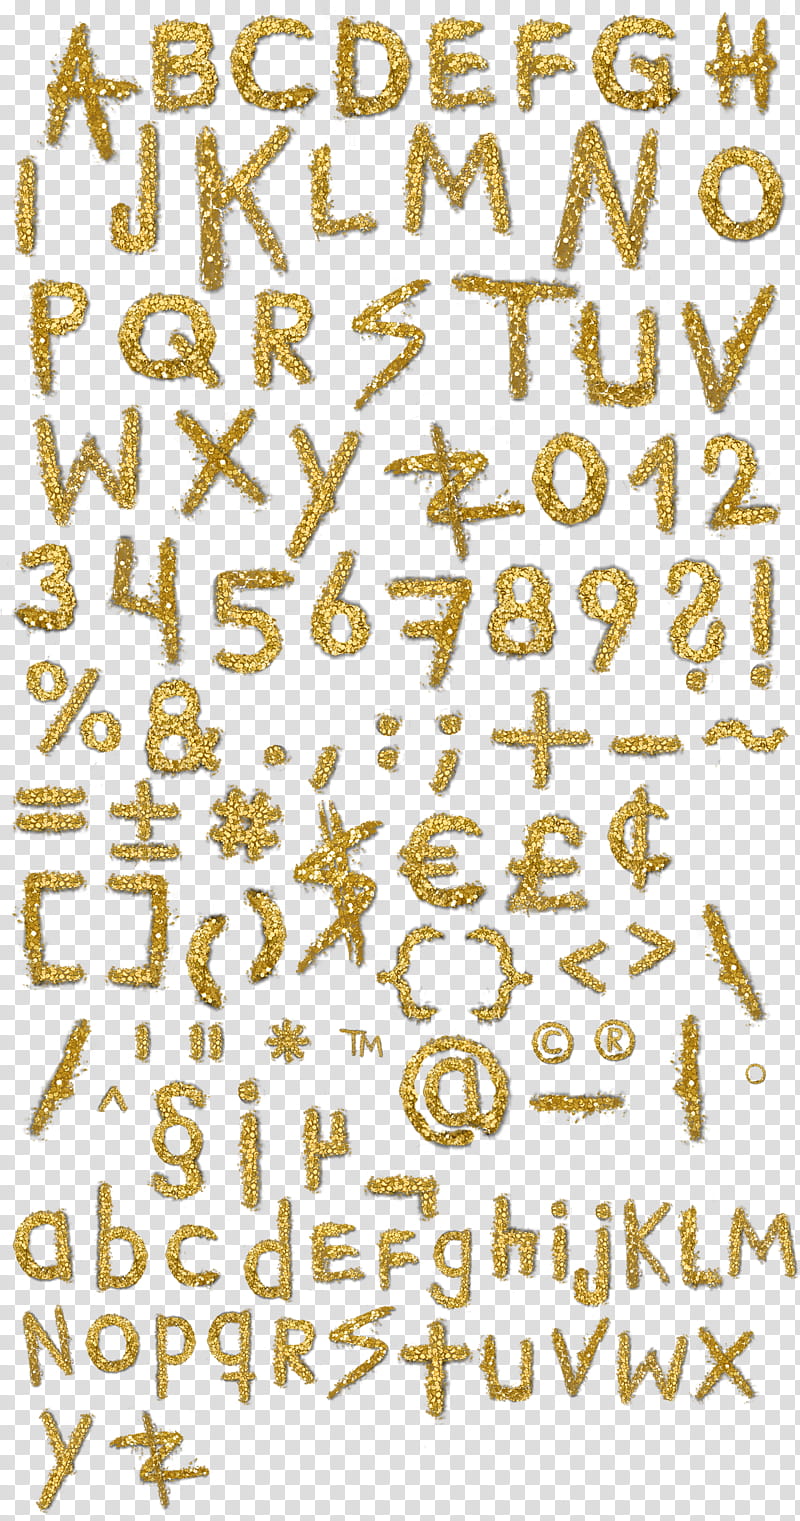 Kesha Cannibal Logos, gold glitter alphabet and numbers transparent background PNG clipart